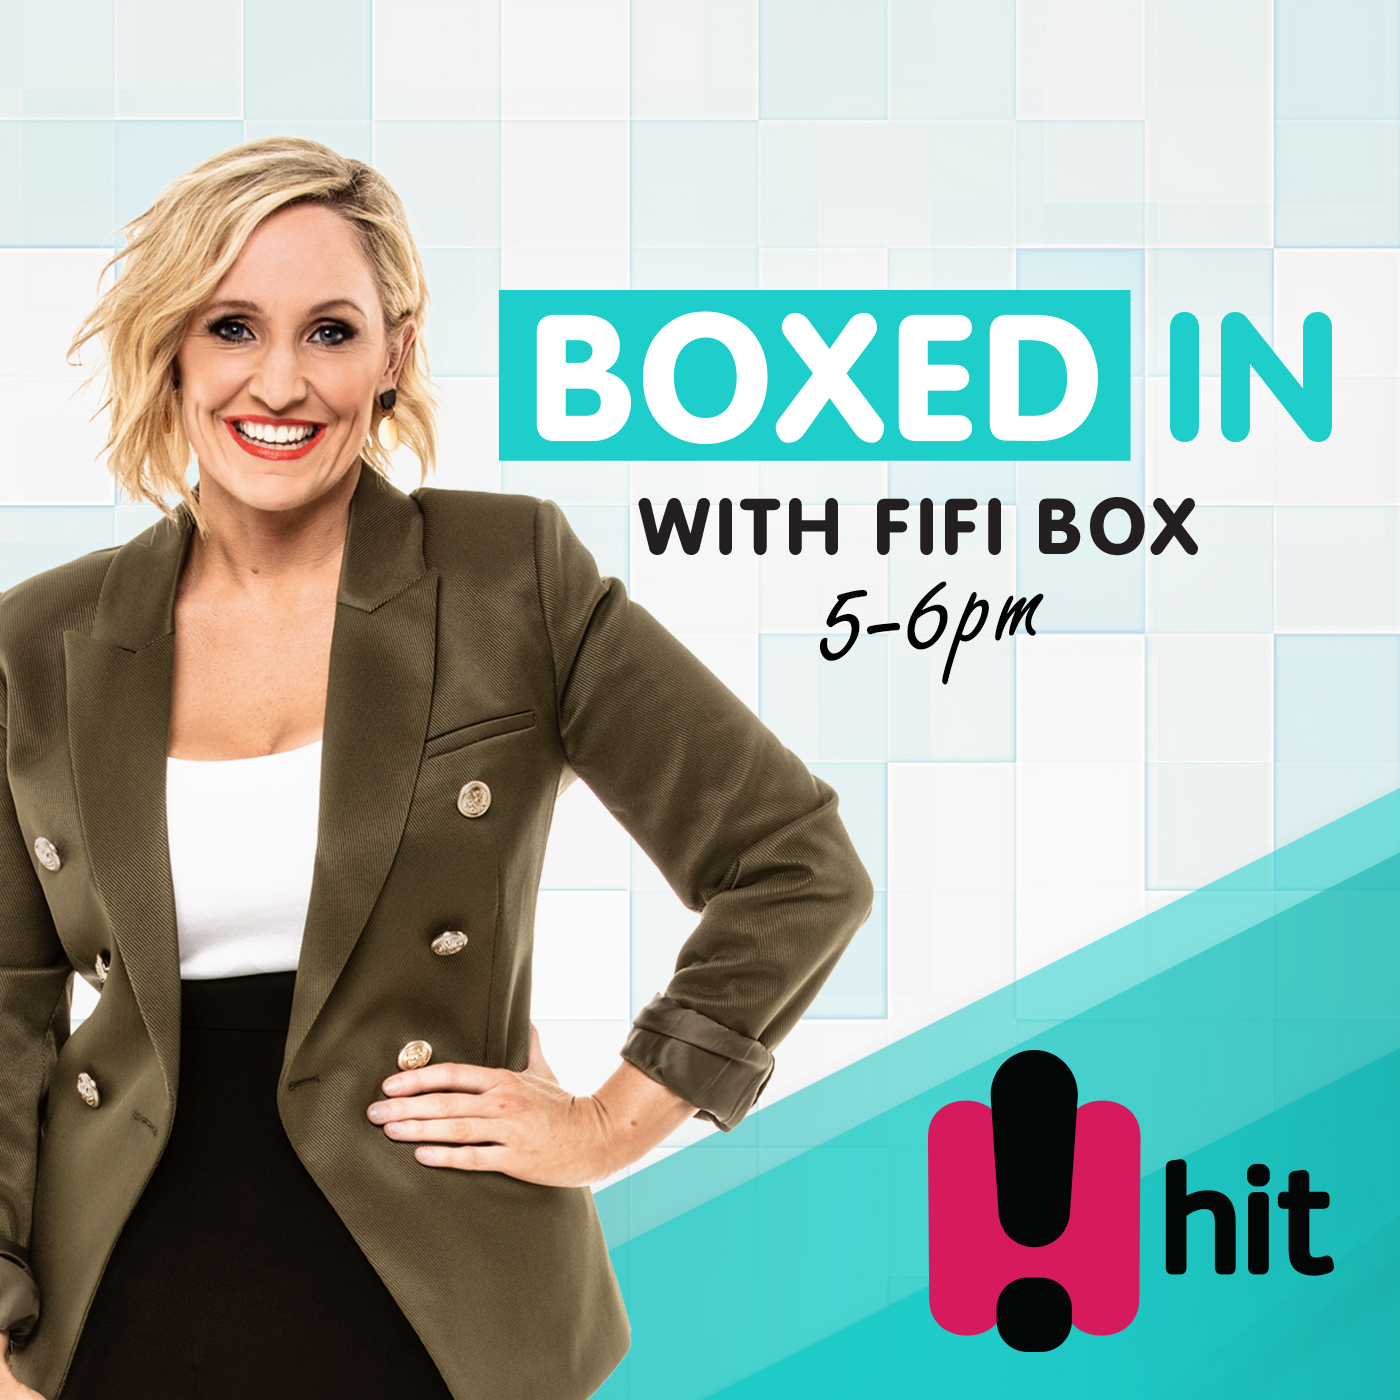 BOXED IN WITH MATTHEW HUSSEY